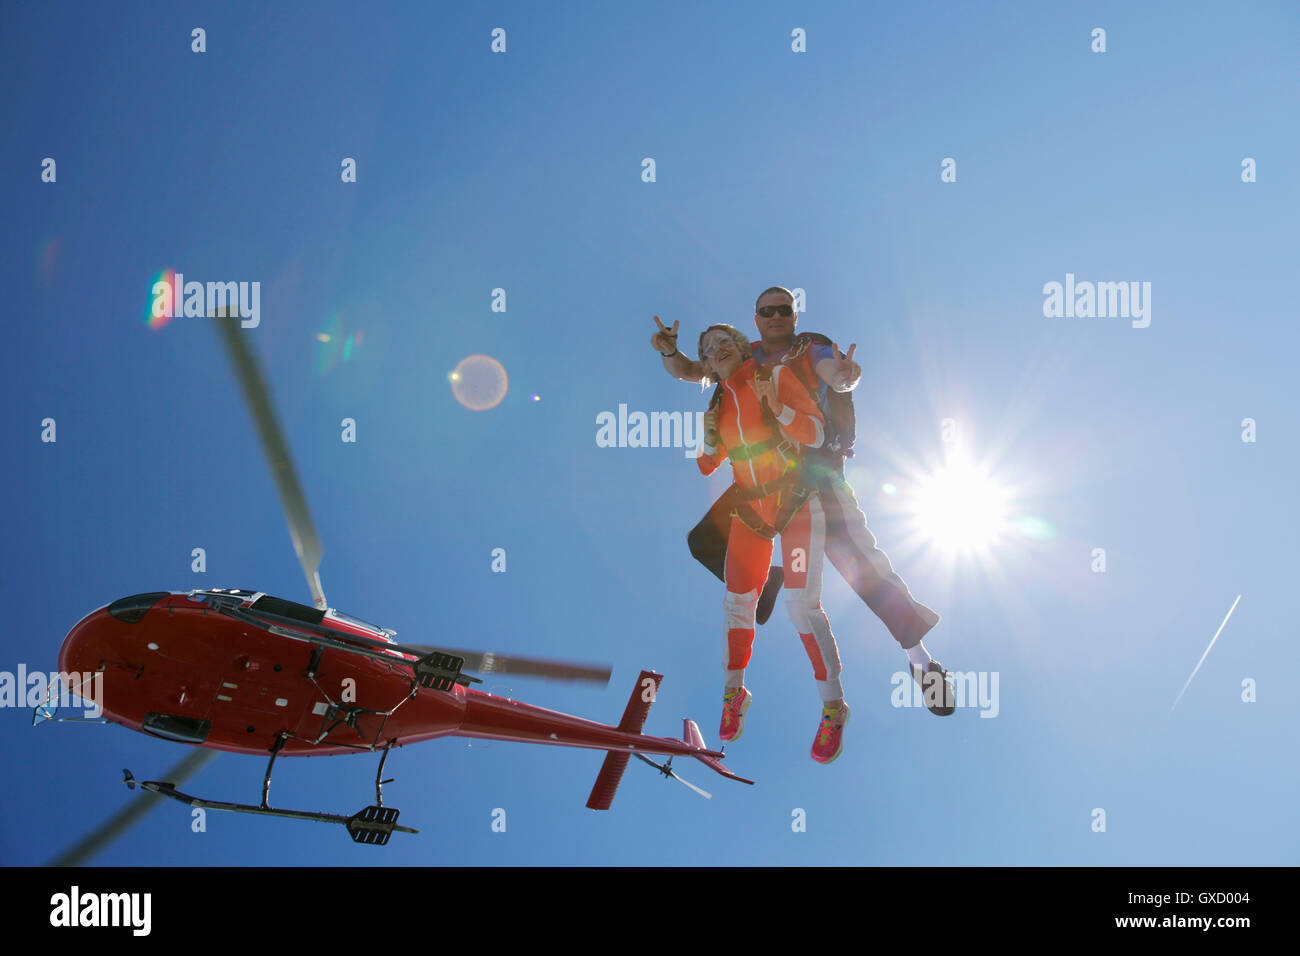 Tandem sky divers free falling with helicopter above, Interlaken, Berne, Switzerland Stock Photo